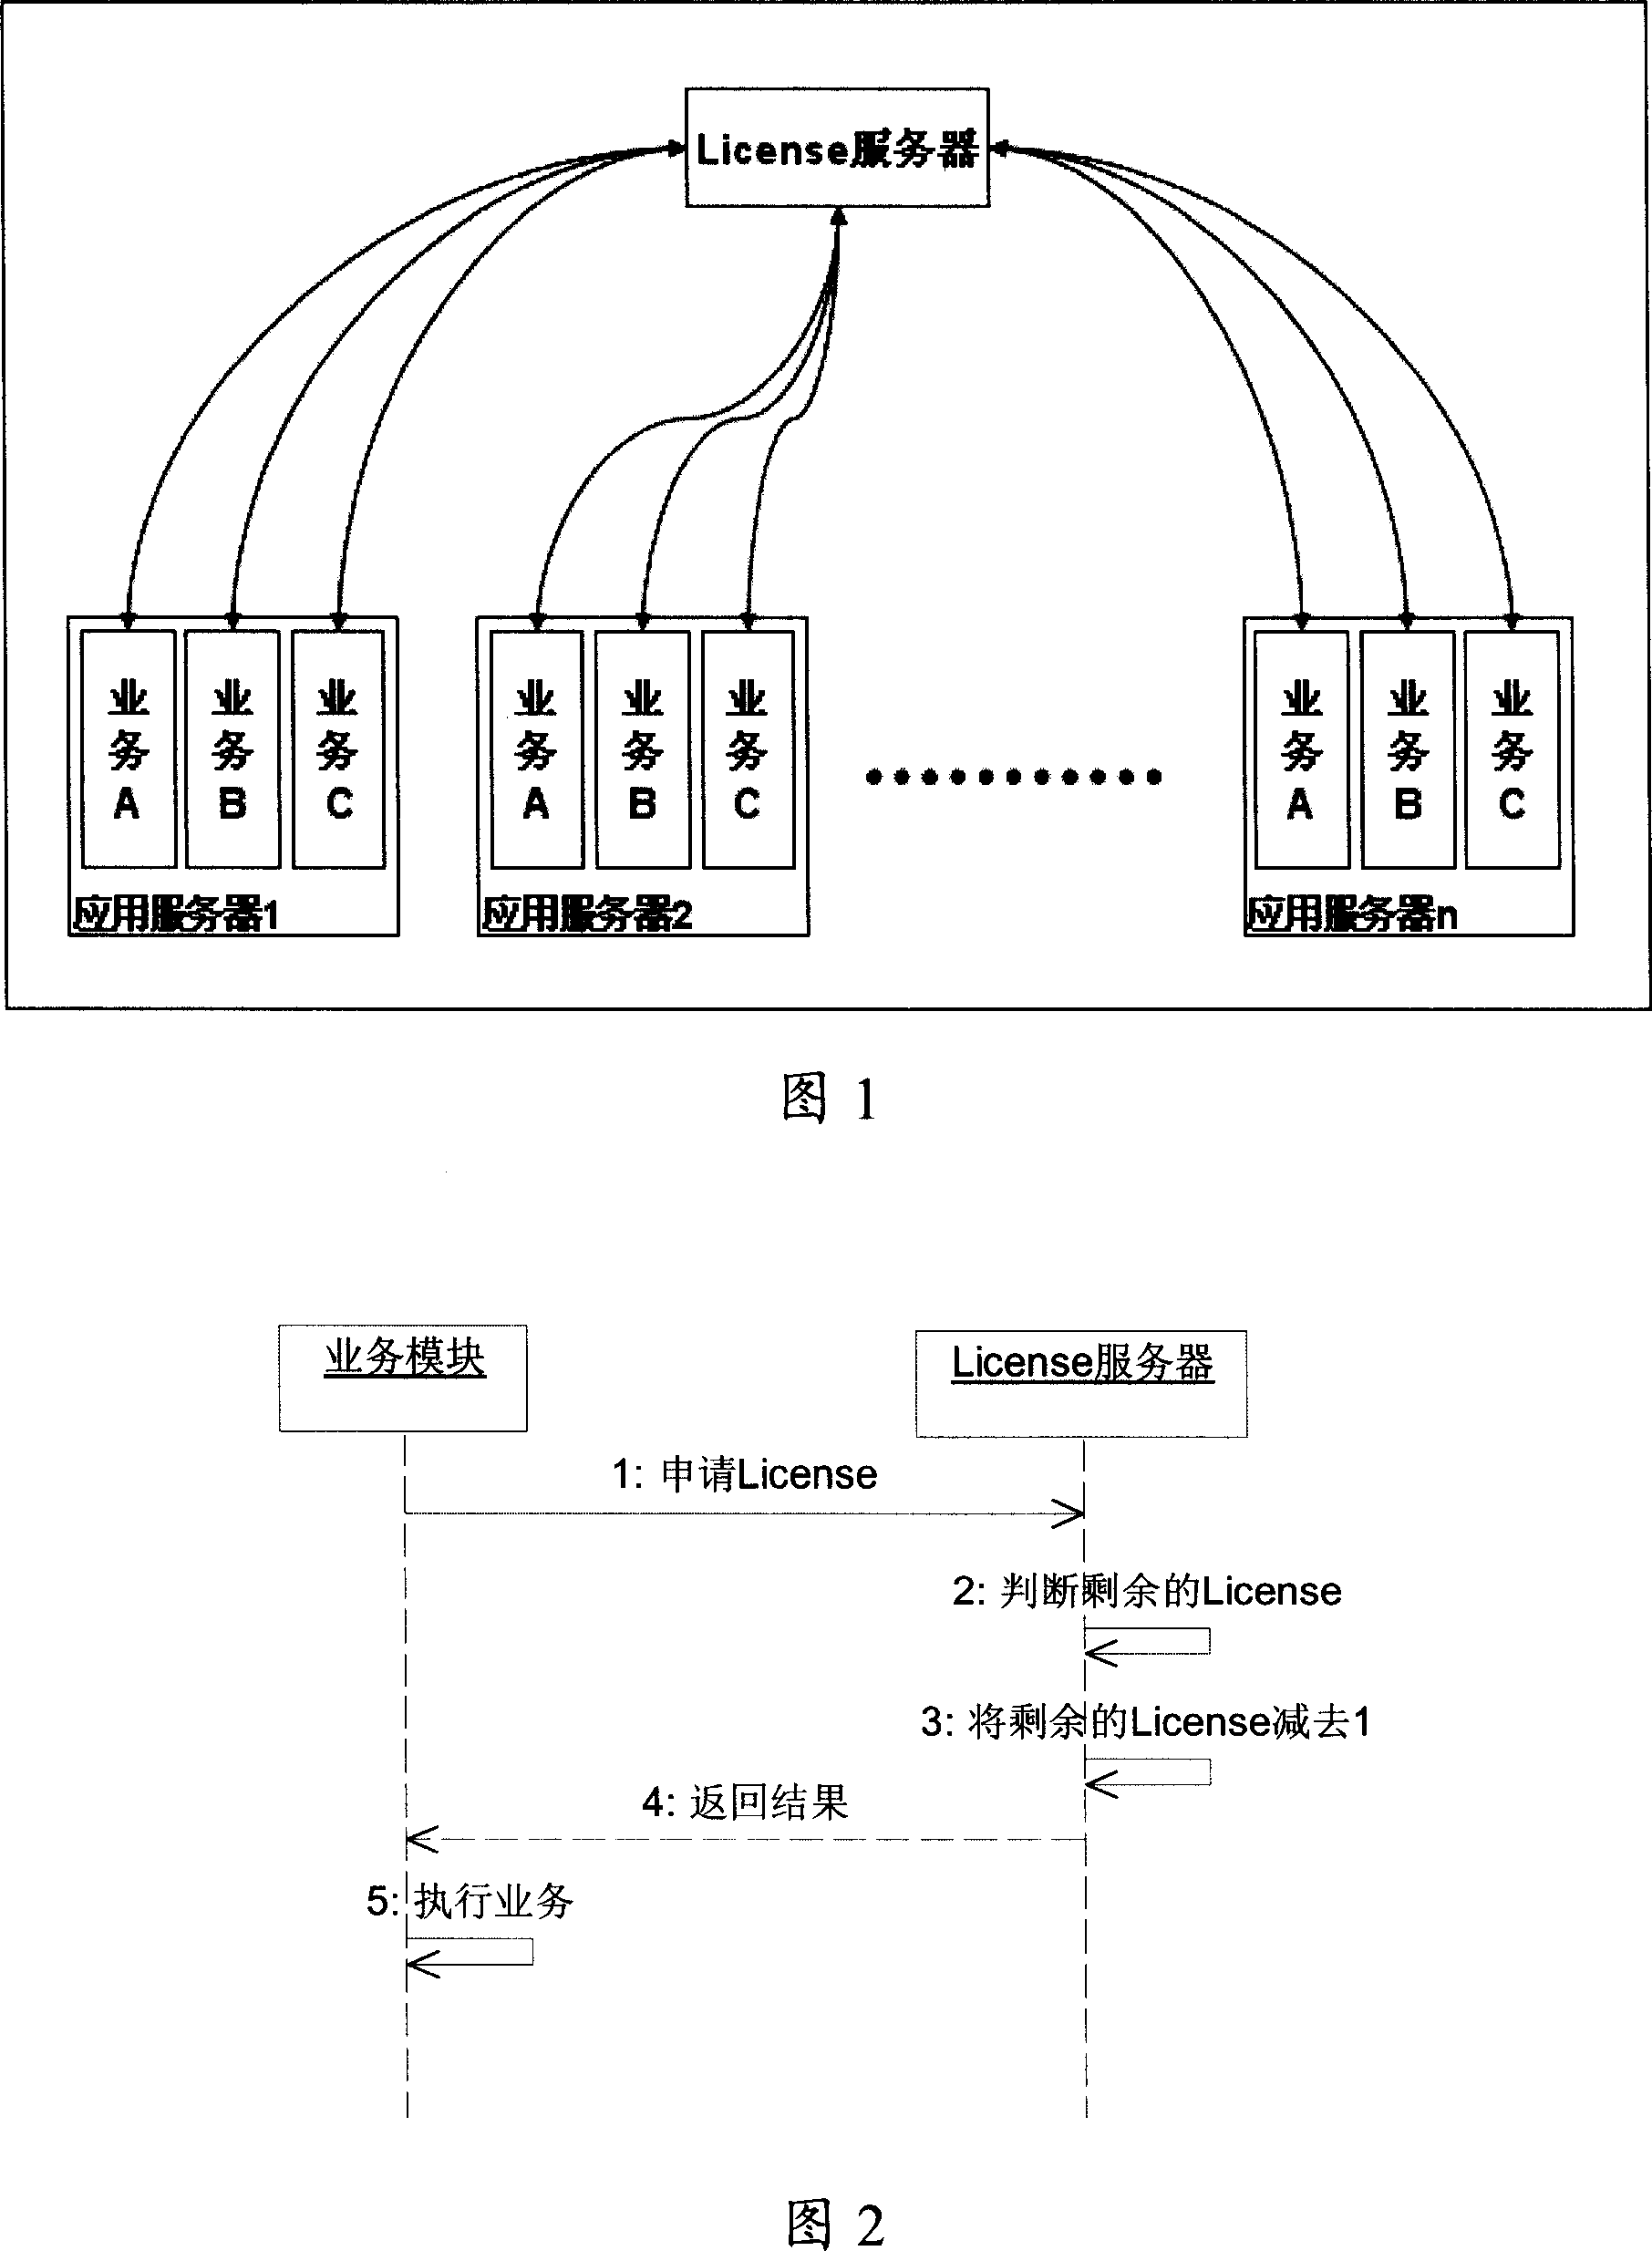 License control method and device